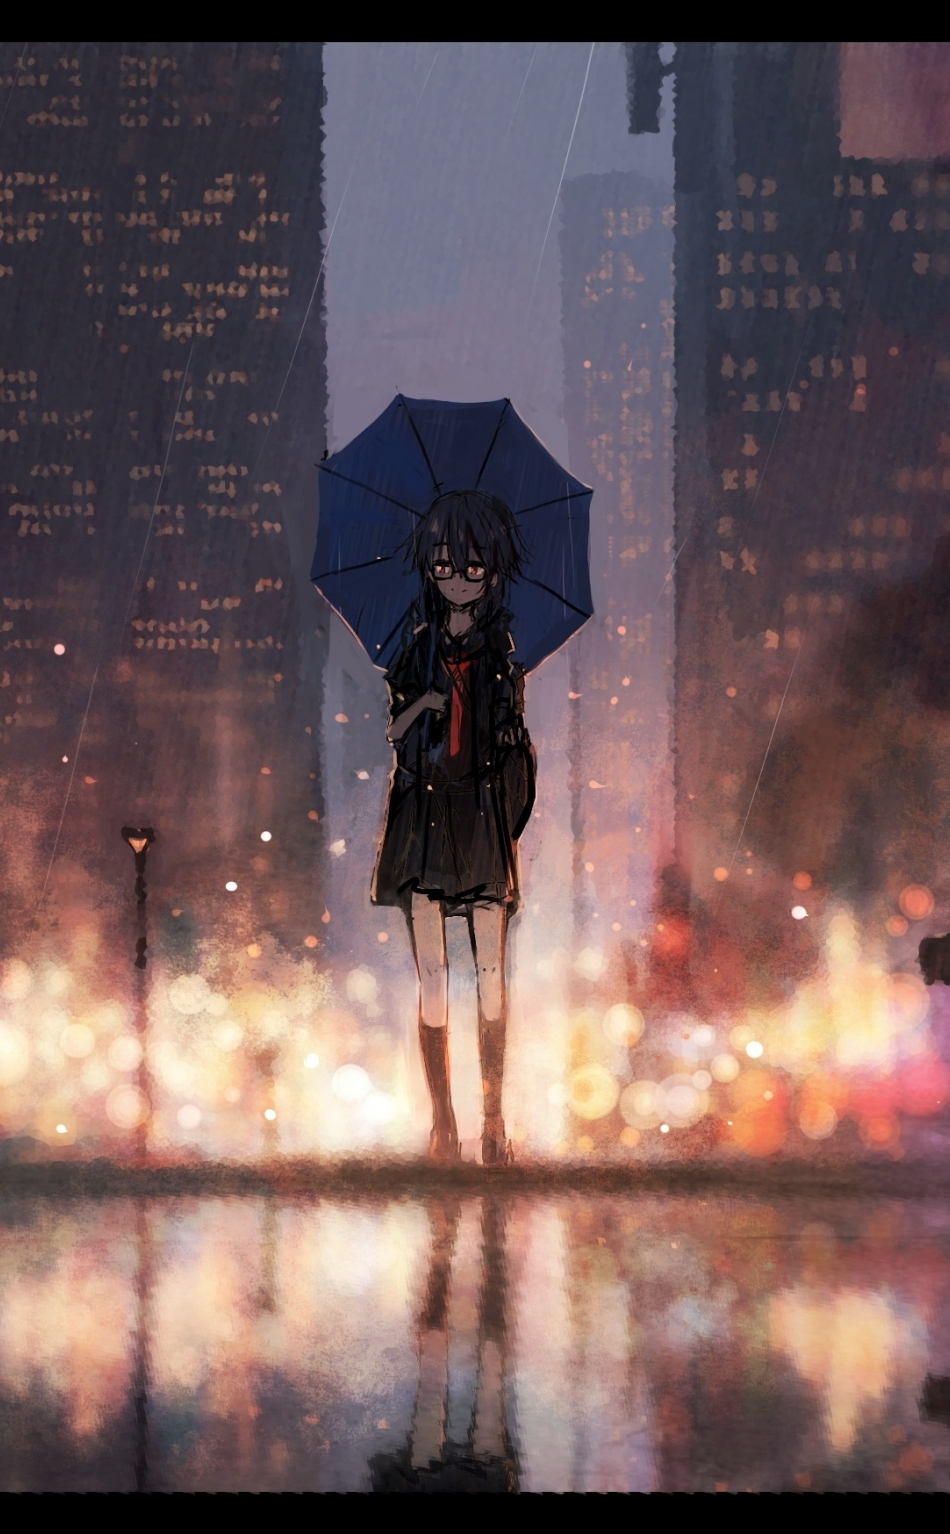 Anime Girl Umbrella Rainy Day 5k HD Anime 4k Wallpapers Images  Backgrounds Photos and Pictures